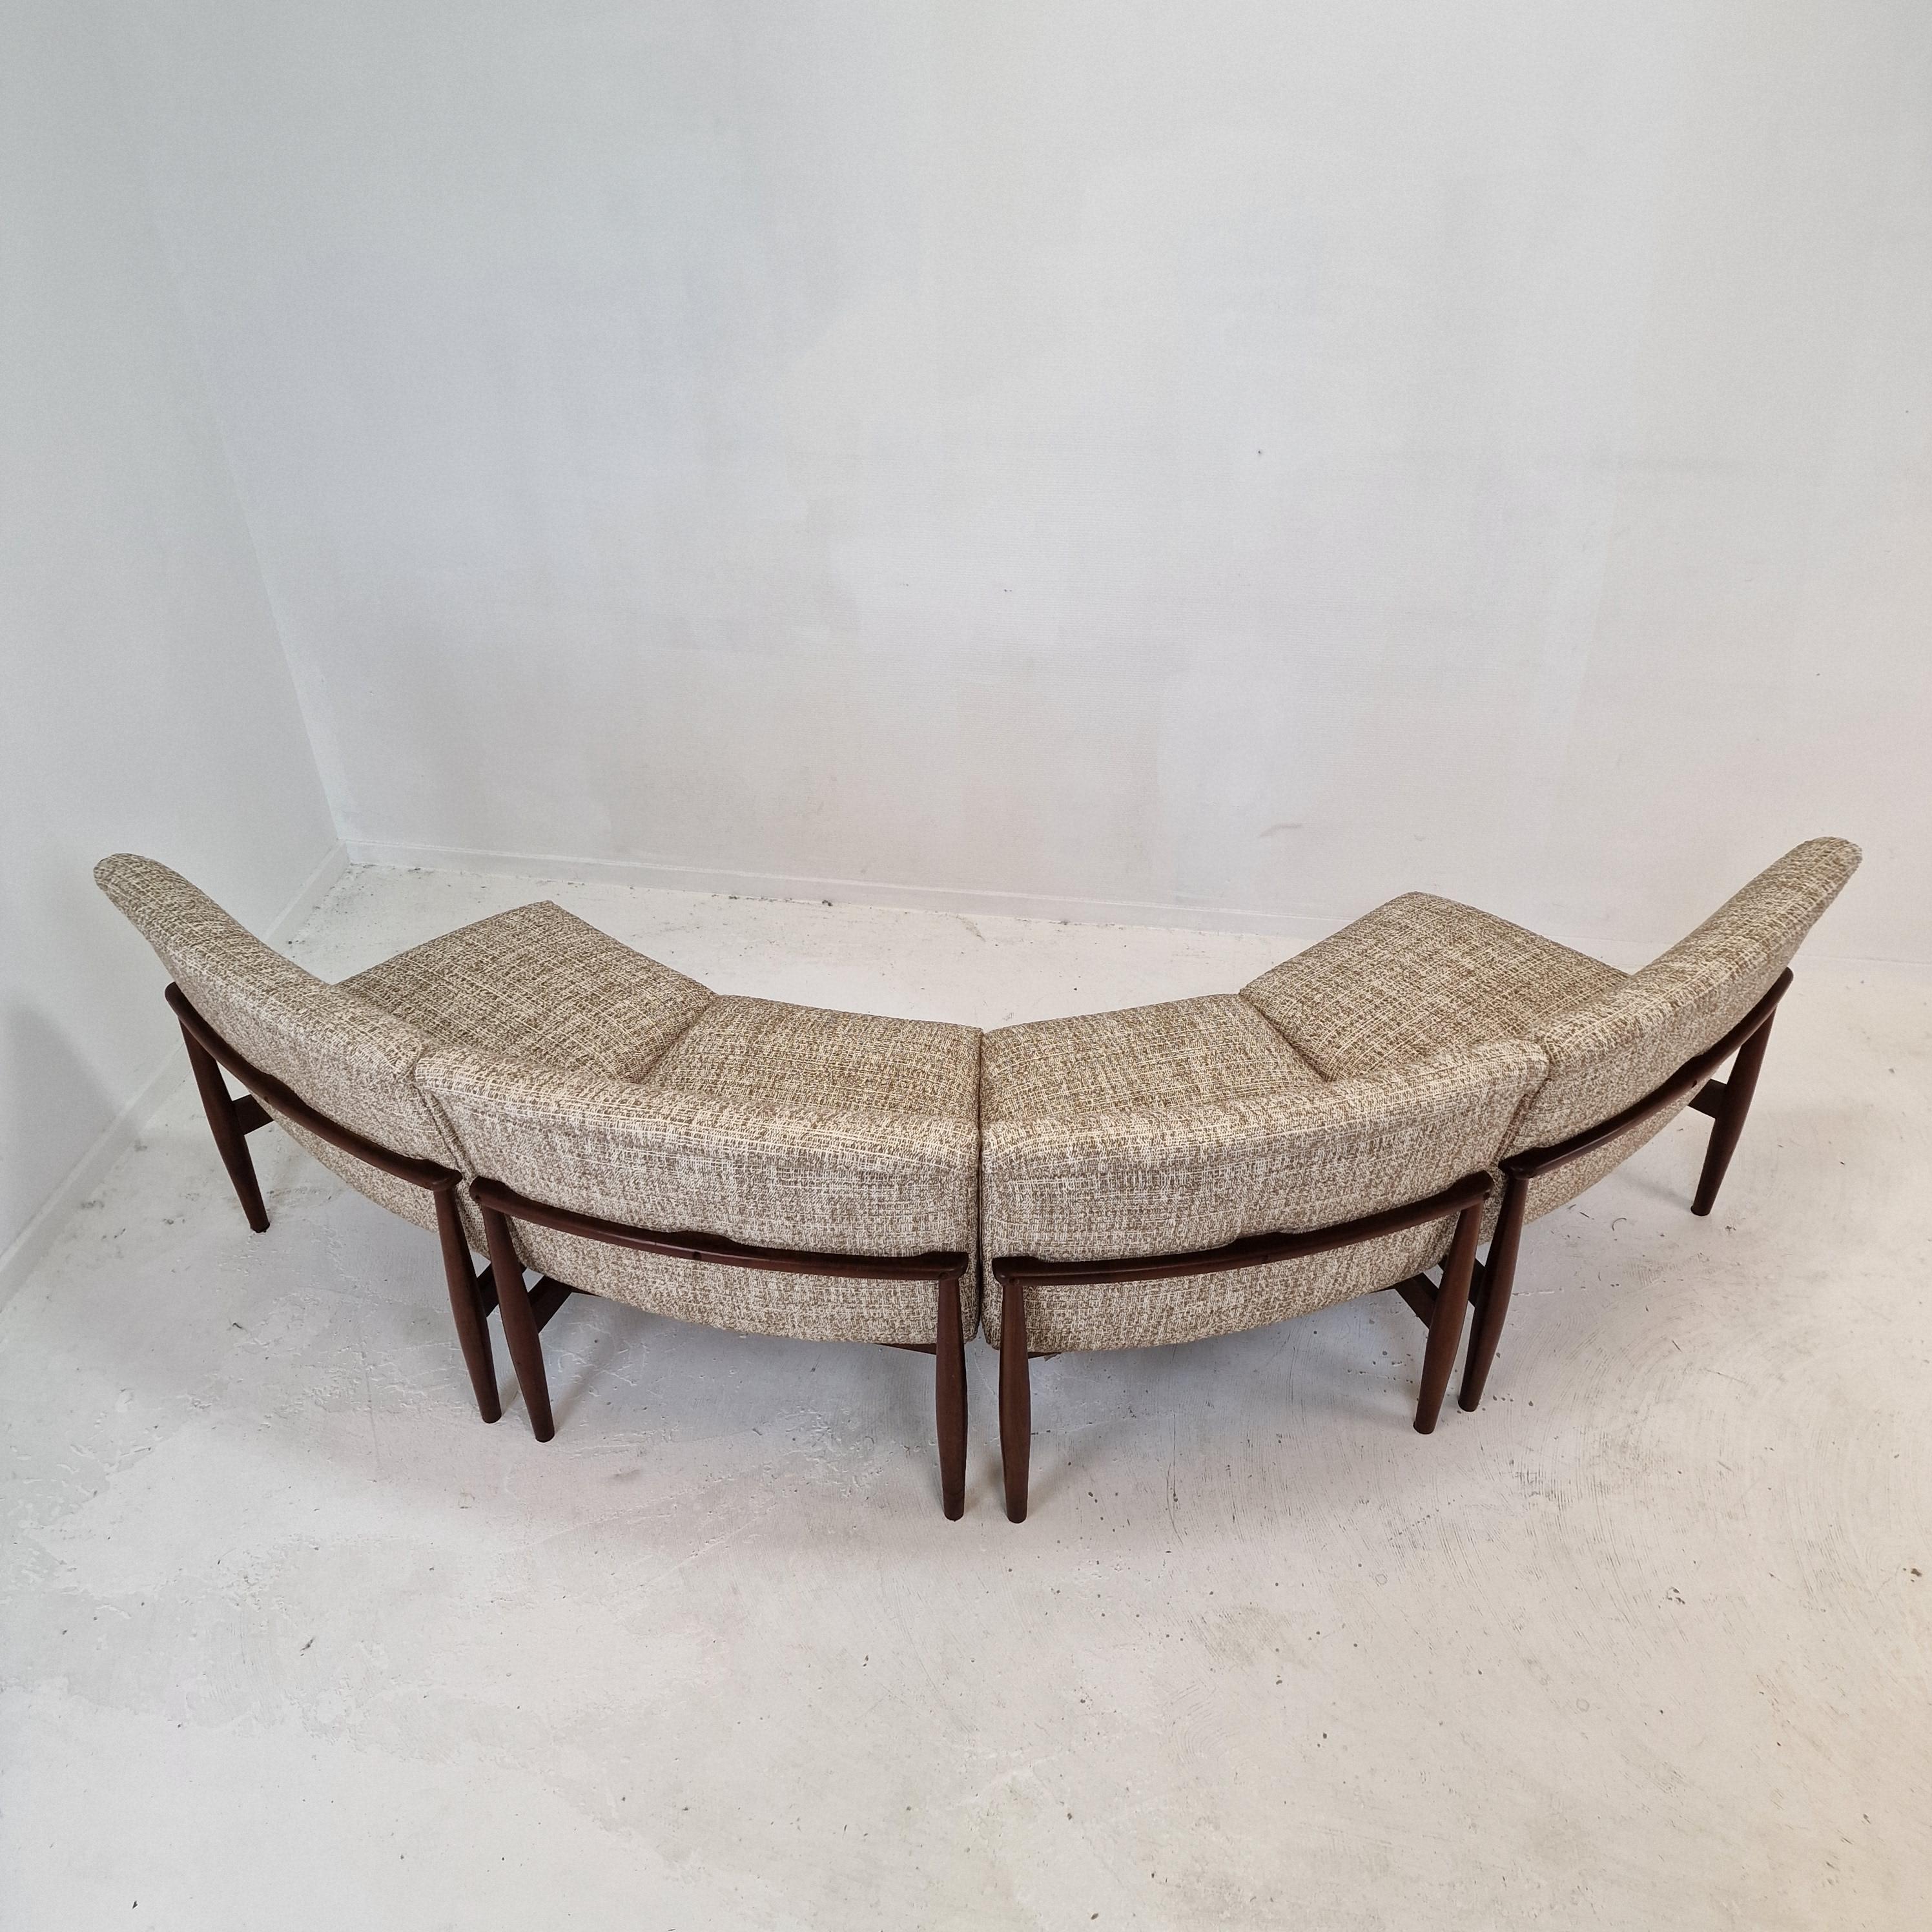 Midcentury Round Bench of 4 Teak Chairs, Denmark, 1960s For Sale 1